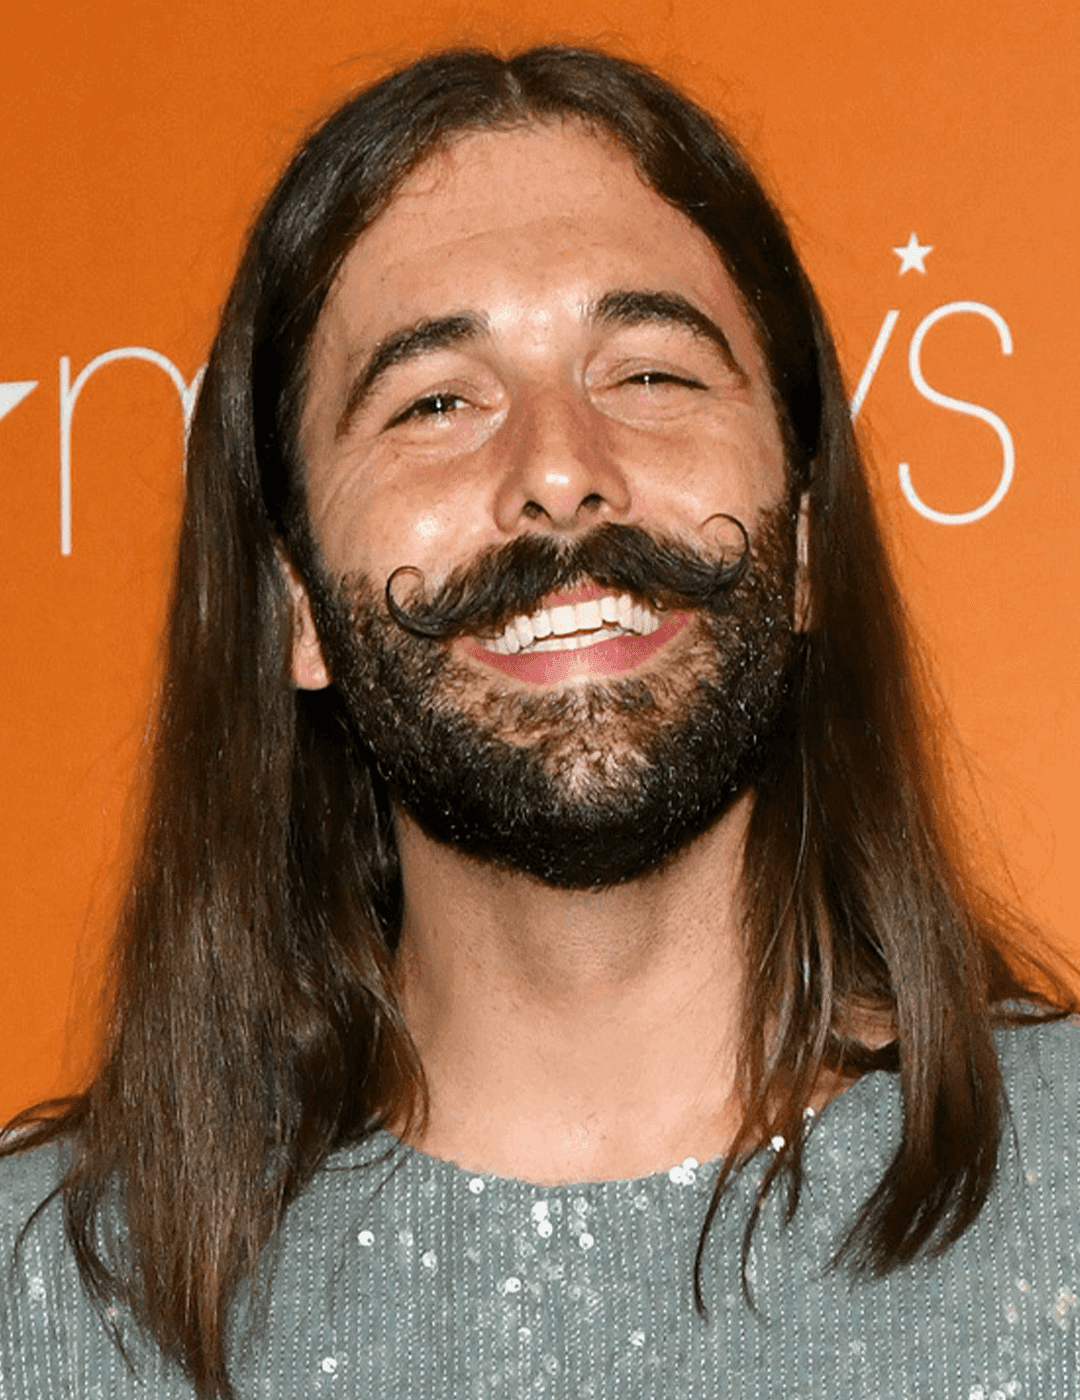 Jonathan Van Ness rocking a sequined top and long hairstyle complete with beard and mustache